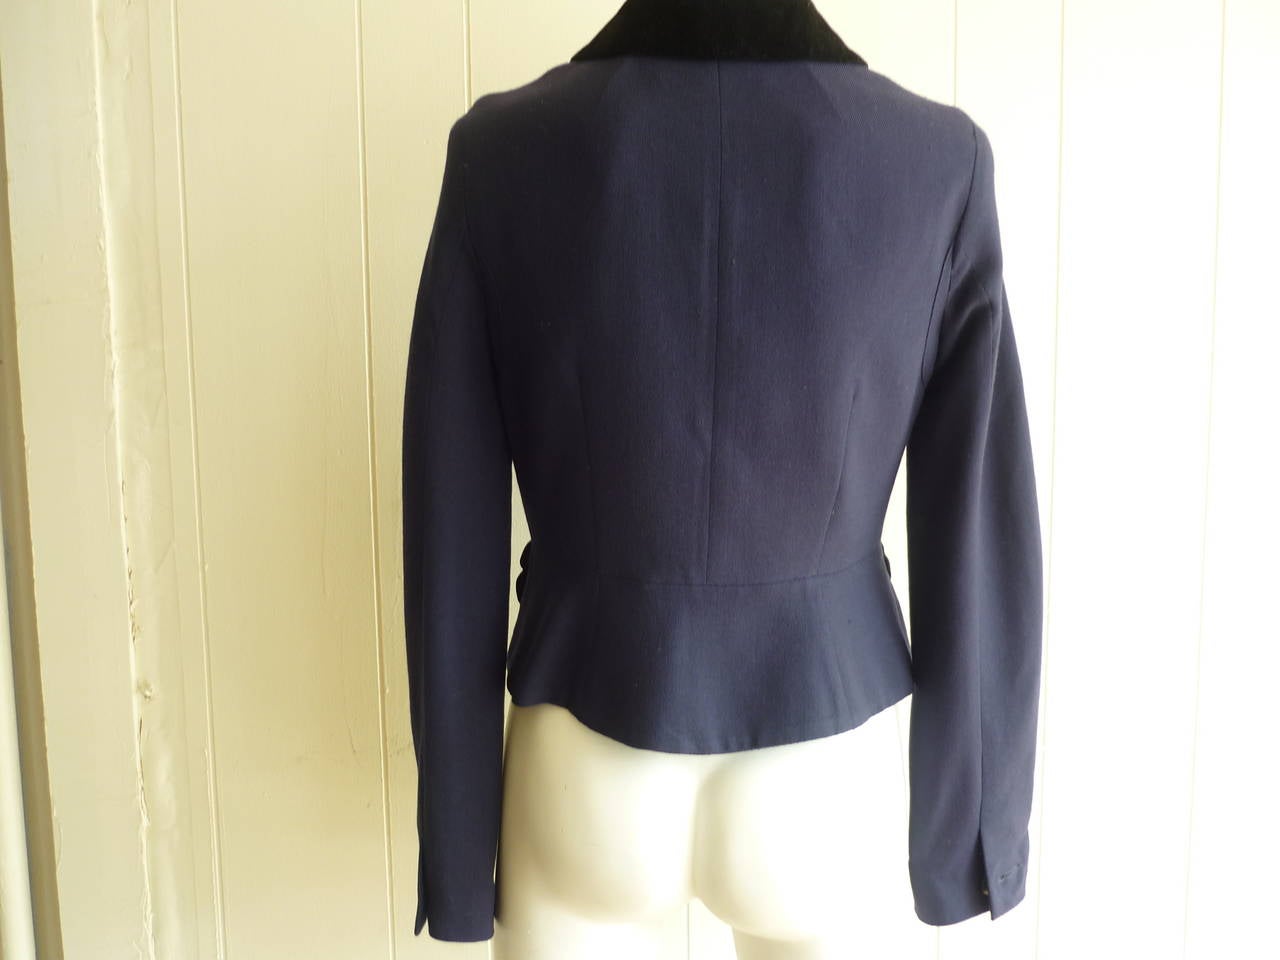 Navy blue wool jacket with black velvet pocket bow and collar detail. This is a very 1940s look with down to the tailoring which includes a weave effect wool, seamed arm pits and several darts. The waist has a slight cintre effect, and there 5